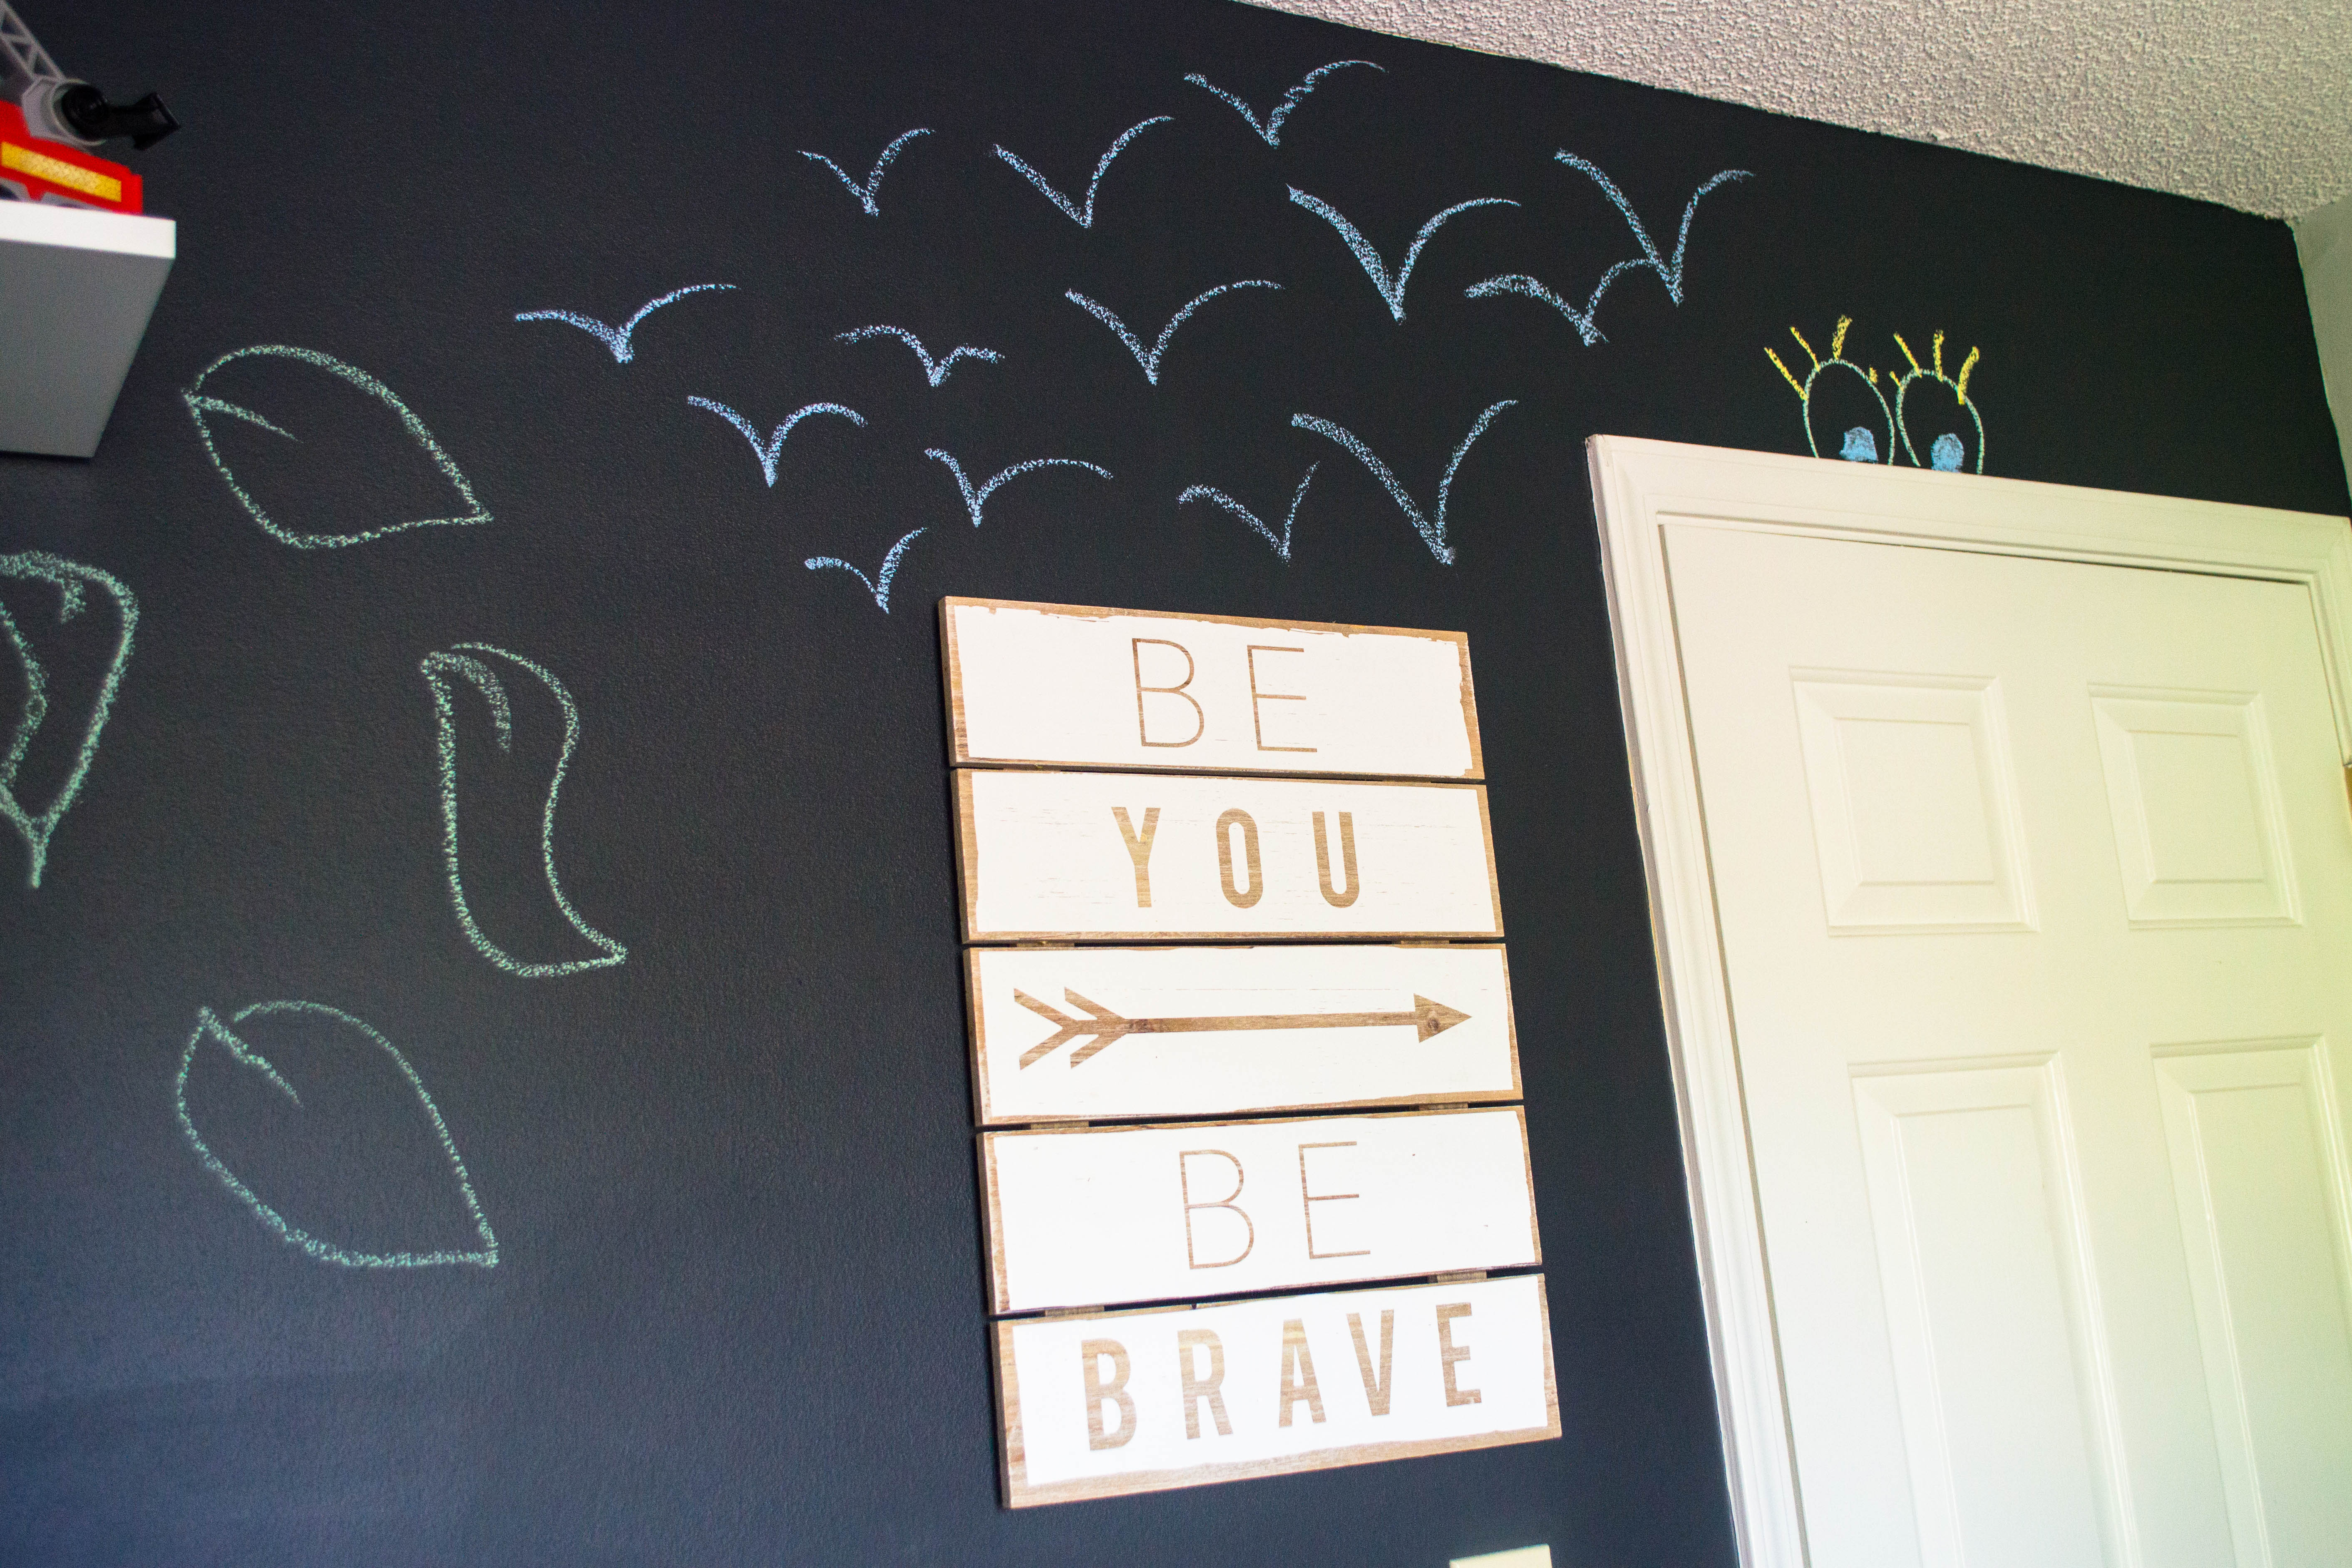 Be You Be Brave – every kid probably needs a chalkboard wall. Yes?